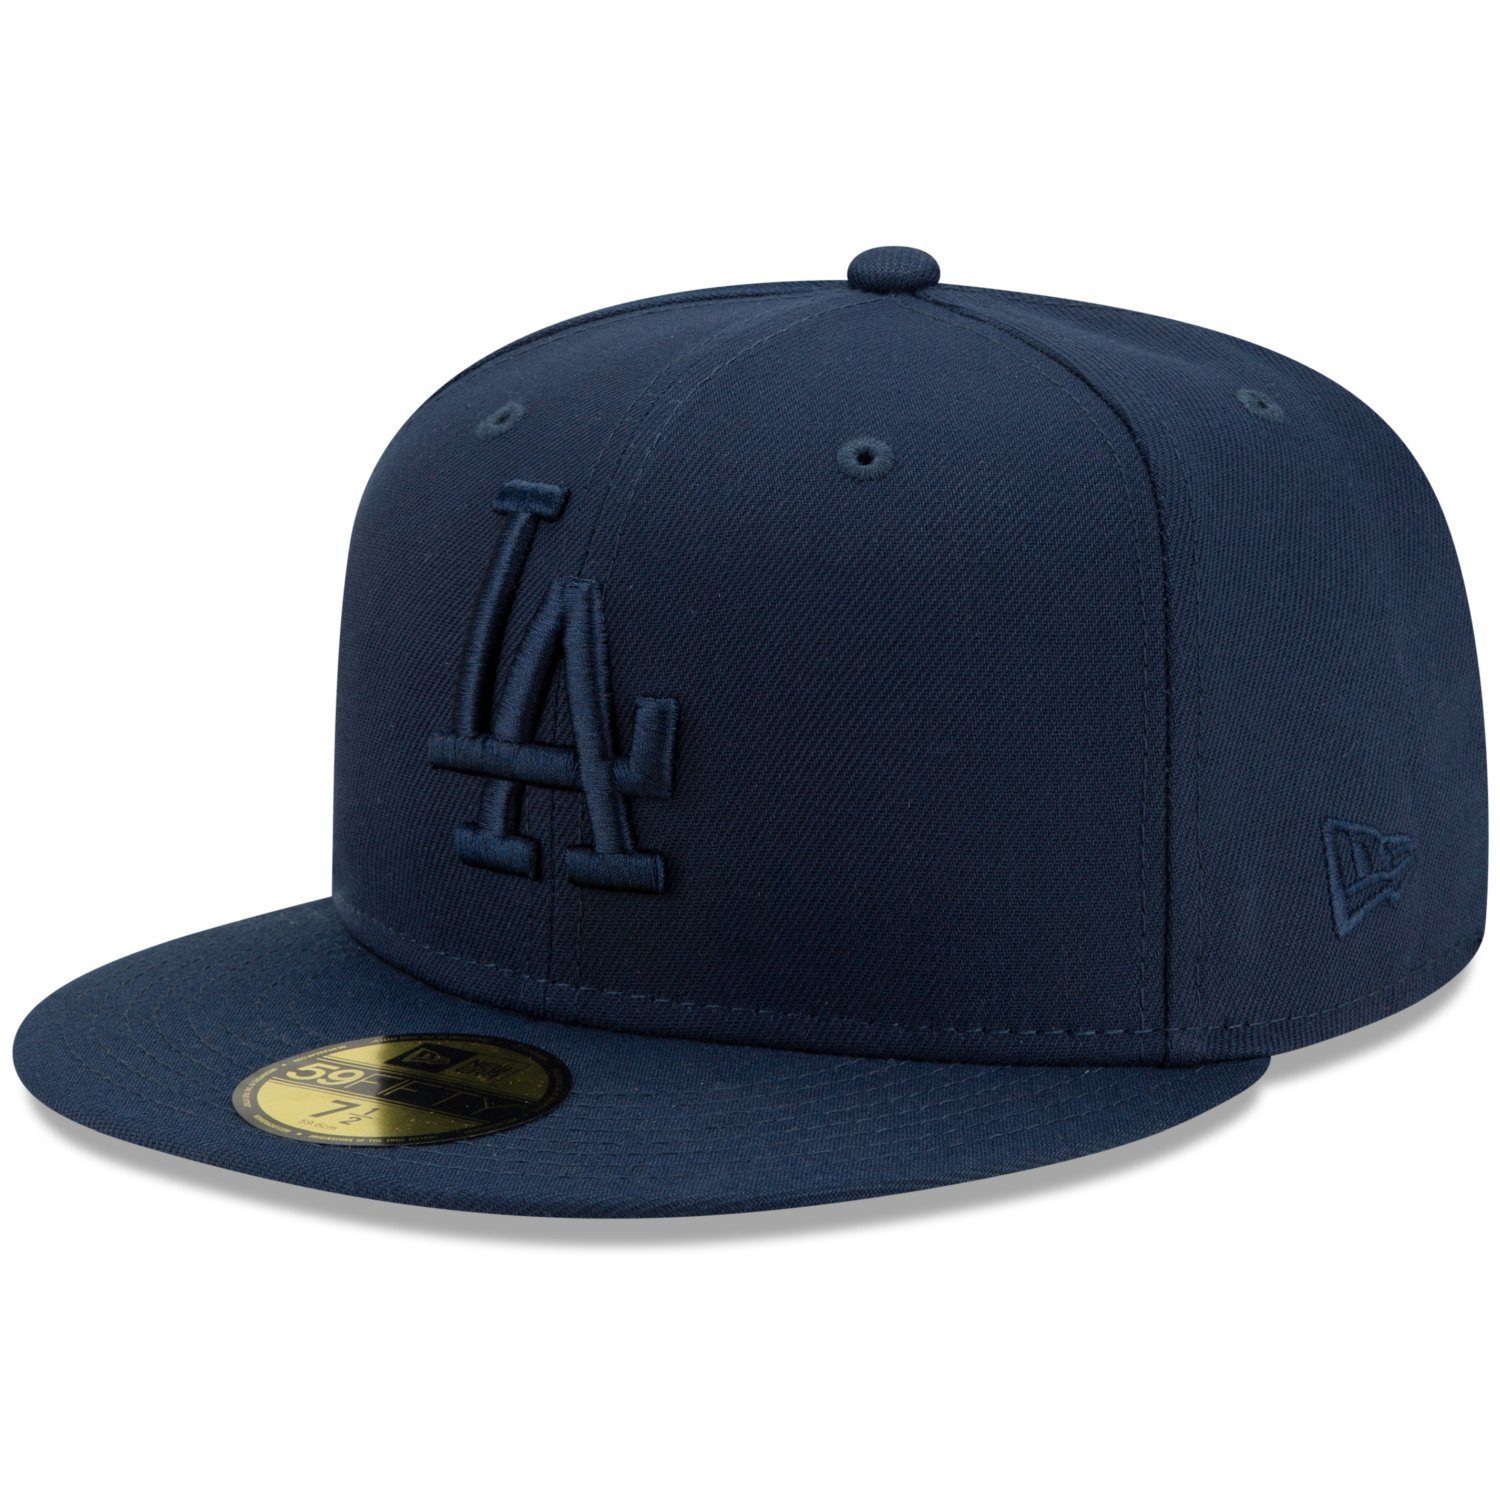 MLB Fitted WORLD Los Angeles New Dodgers Era Cap SERIES 59Fifty